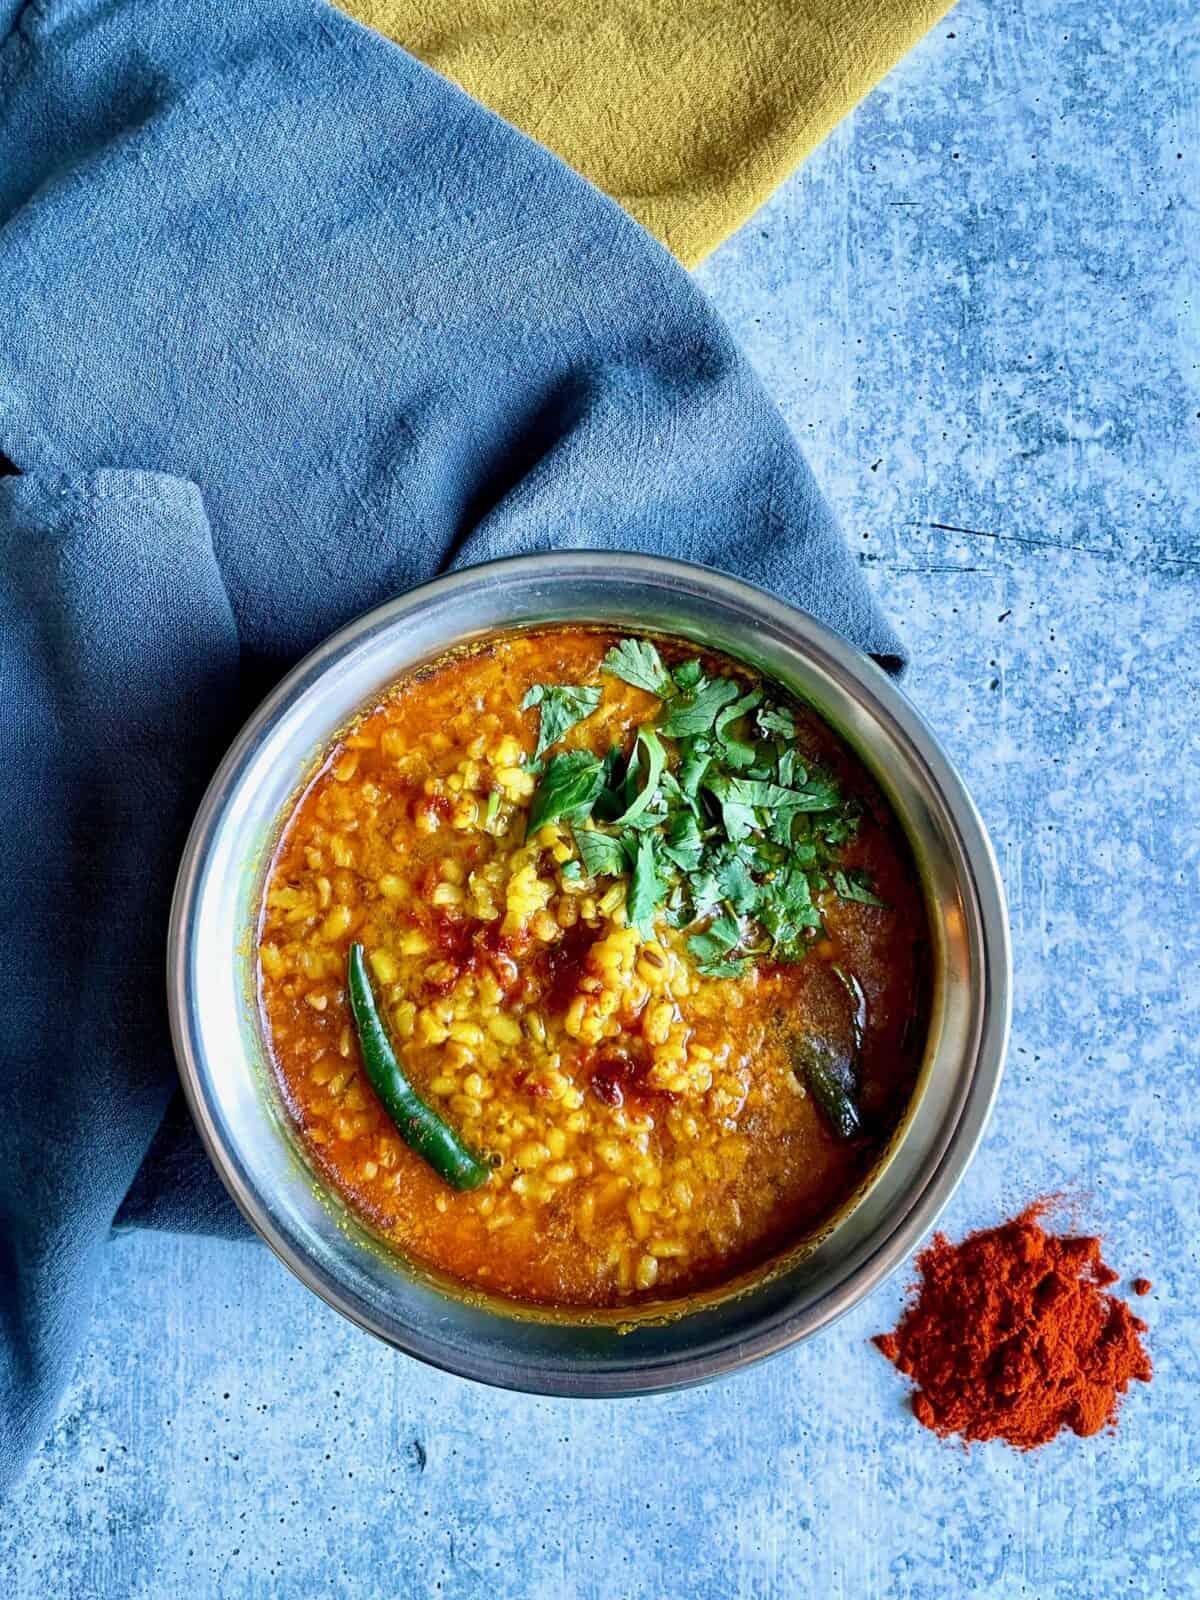 Typical Bengali Moong Dal Recipe (with Mustard Oil)